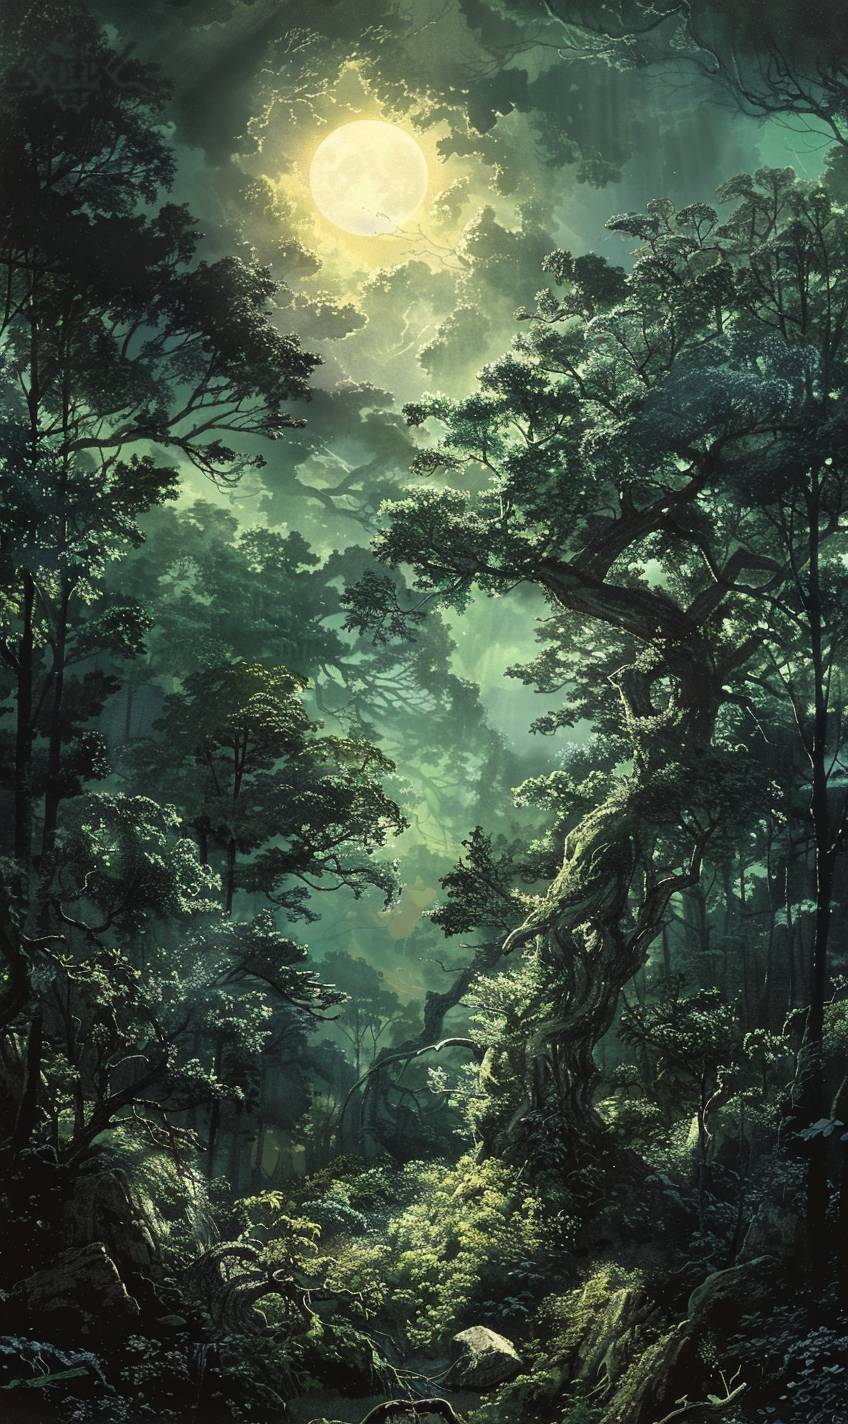 In the style of Akihiko Yoshida, Whispering winds in a mystical forest